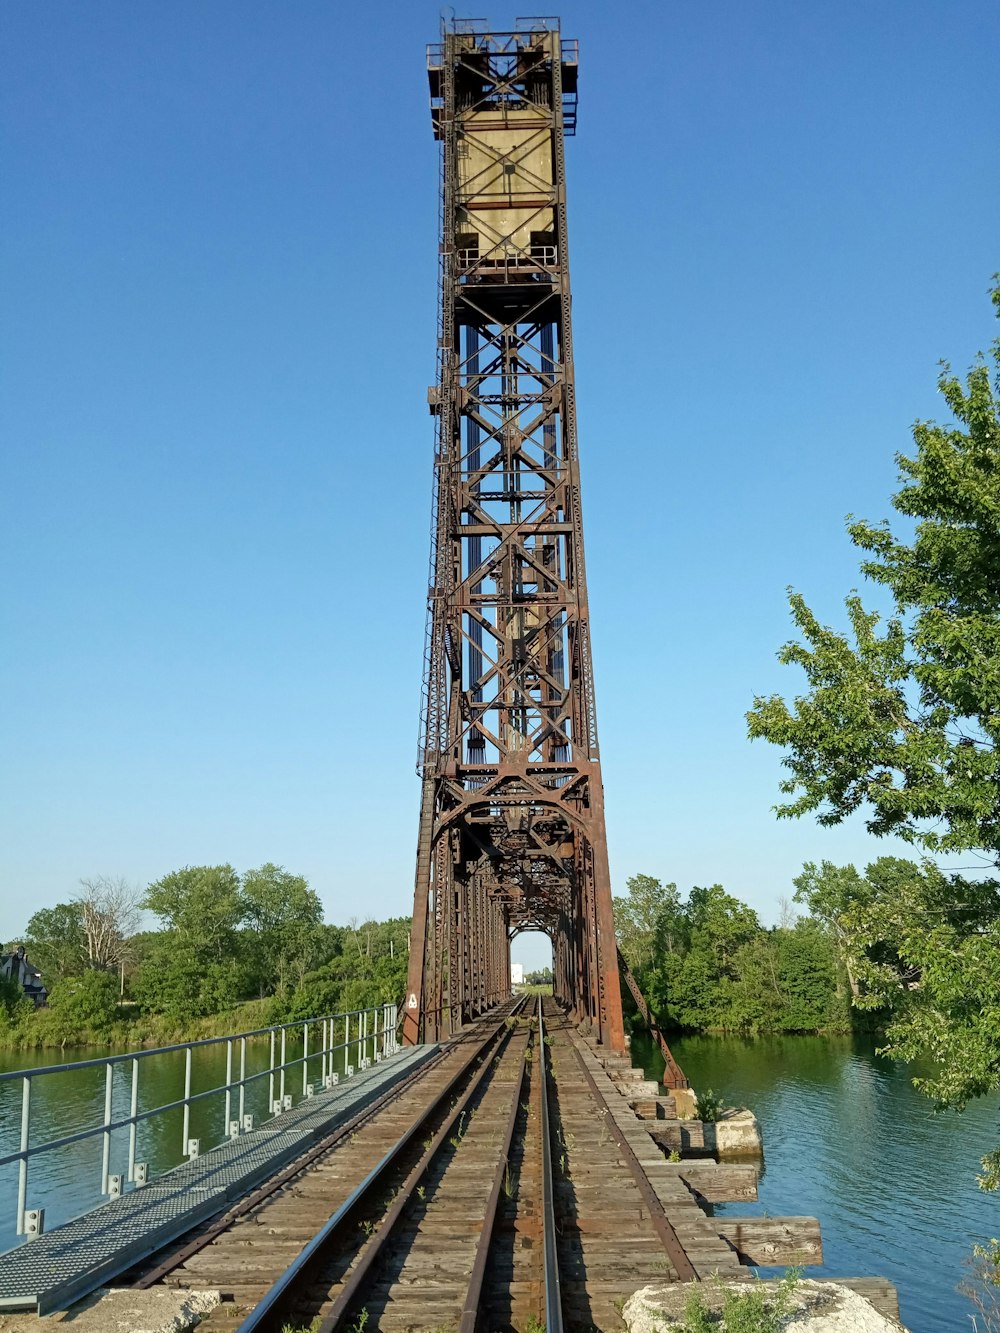 a large metal tower next to a body of water